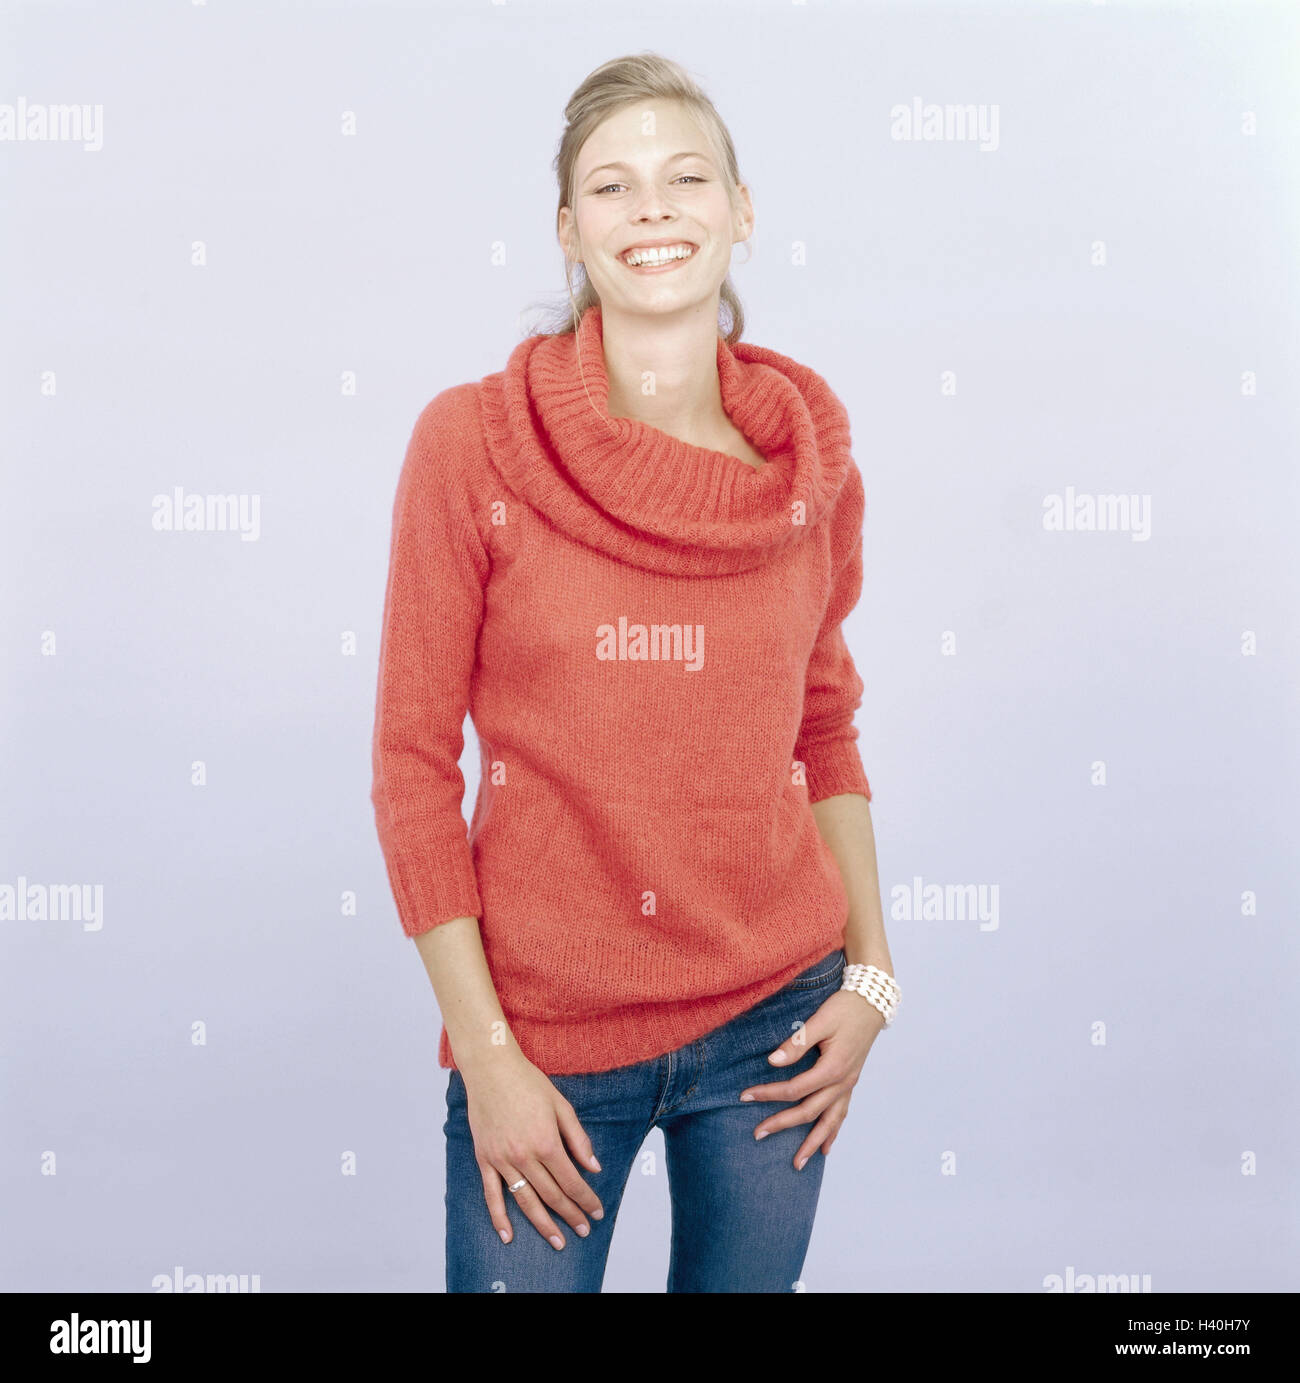 Youthfully, blond, view camera, smile, curled freely for Großflächenplakatierung 16-20 years, 20-30 years, woman, young, long-haired, hairs tied together, jeans, pullovers orange, knitted pullover, naturalness, do not stand, friendly, balance, happy, joy, Stock Photo